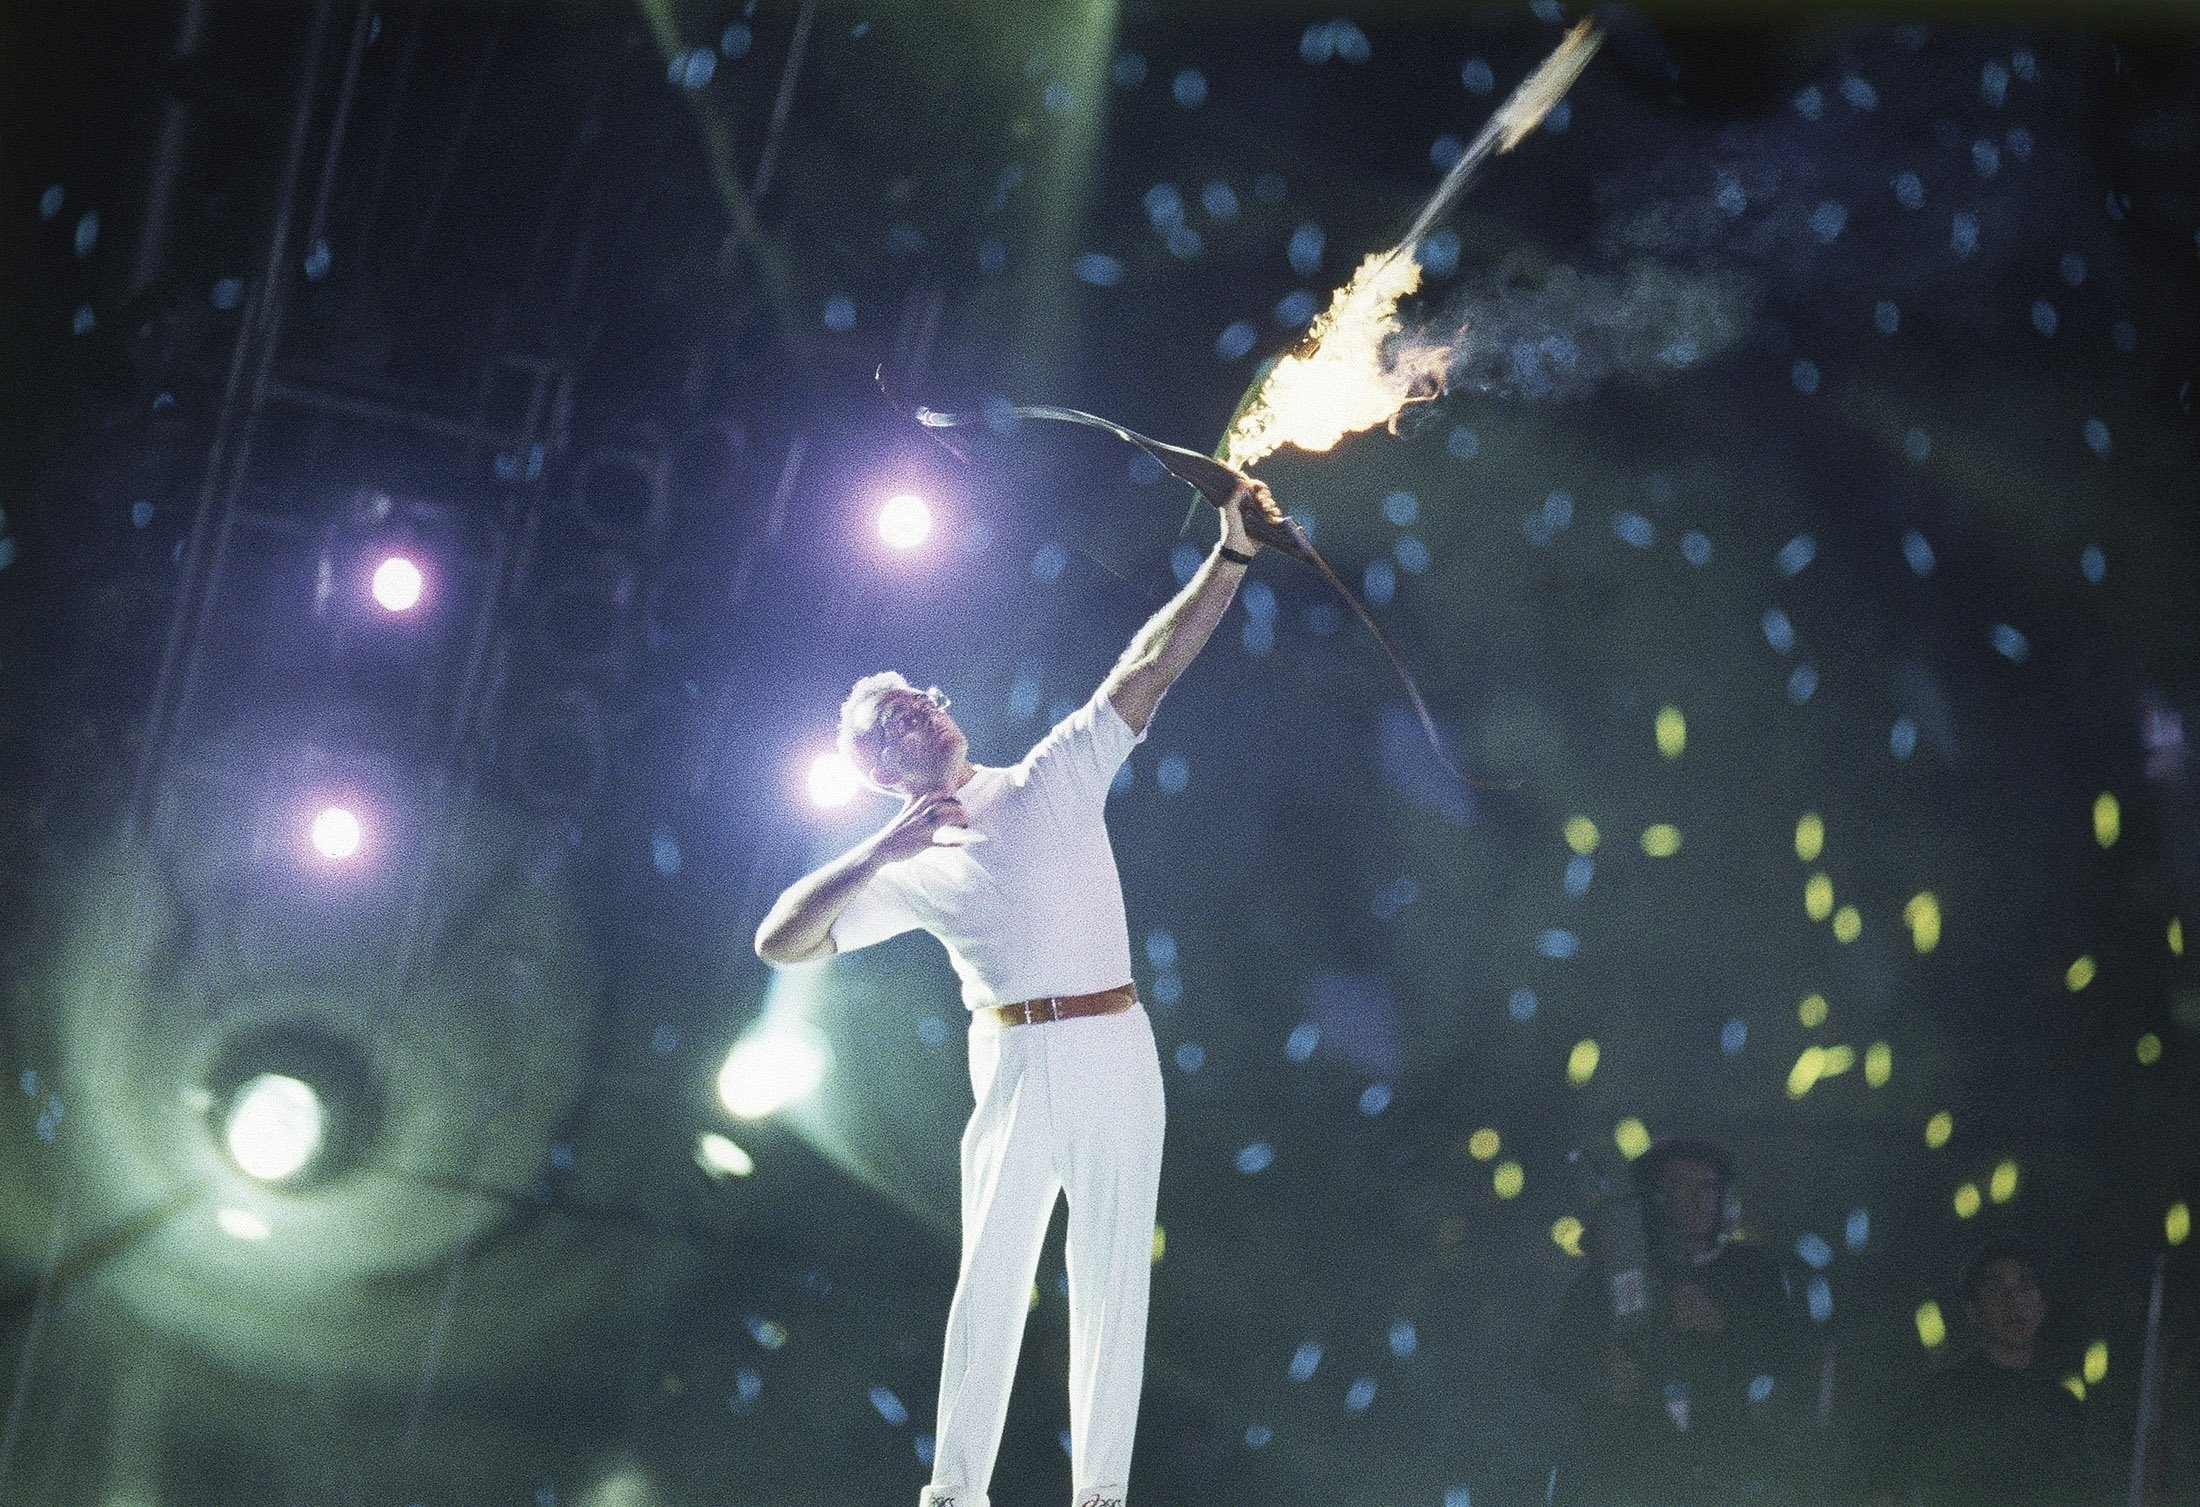 Olympic Flame: The 1992 Barcelona Olympics, An archer, Paralympic Games, Antonio Rebollo, A burning arrow, 100 Years of lighting. 2200x1510 HD Wallpaper.